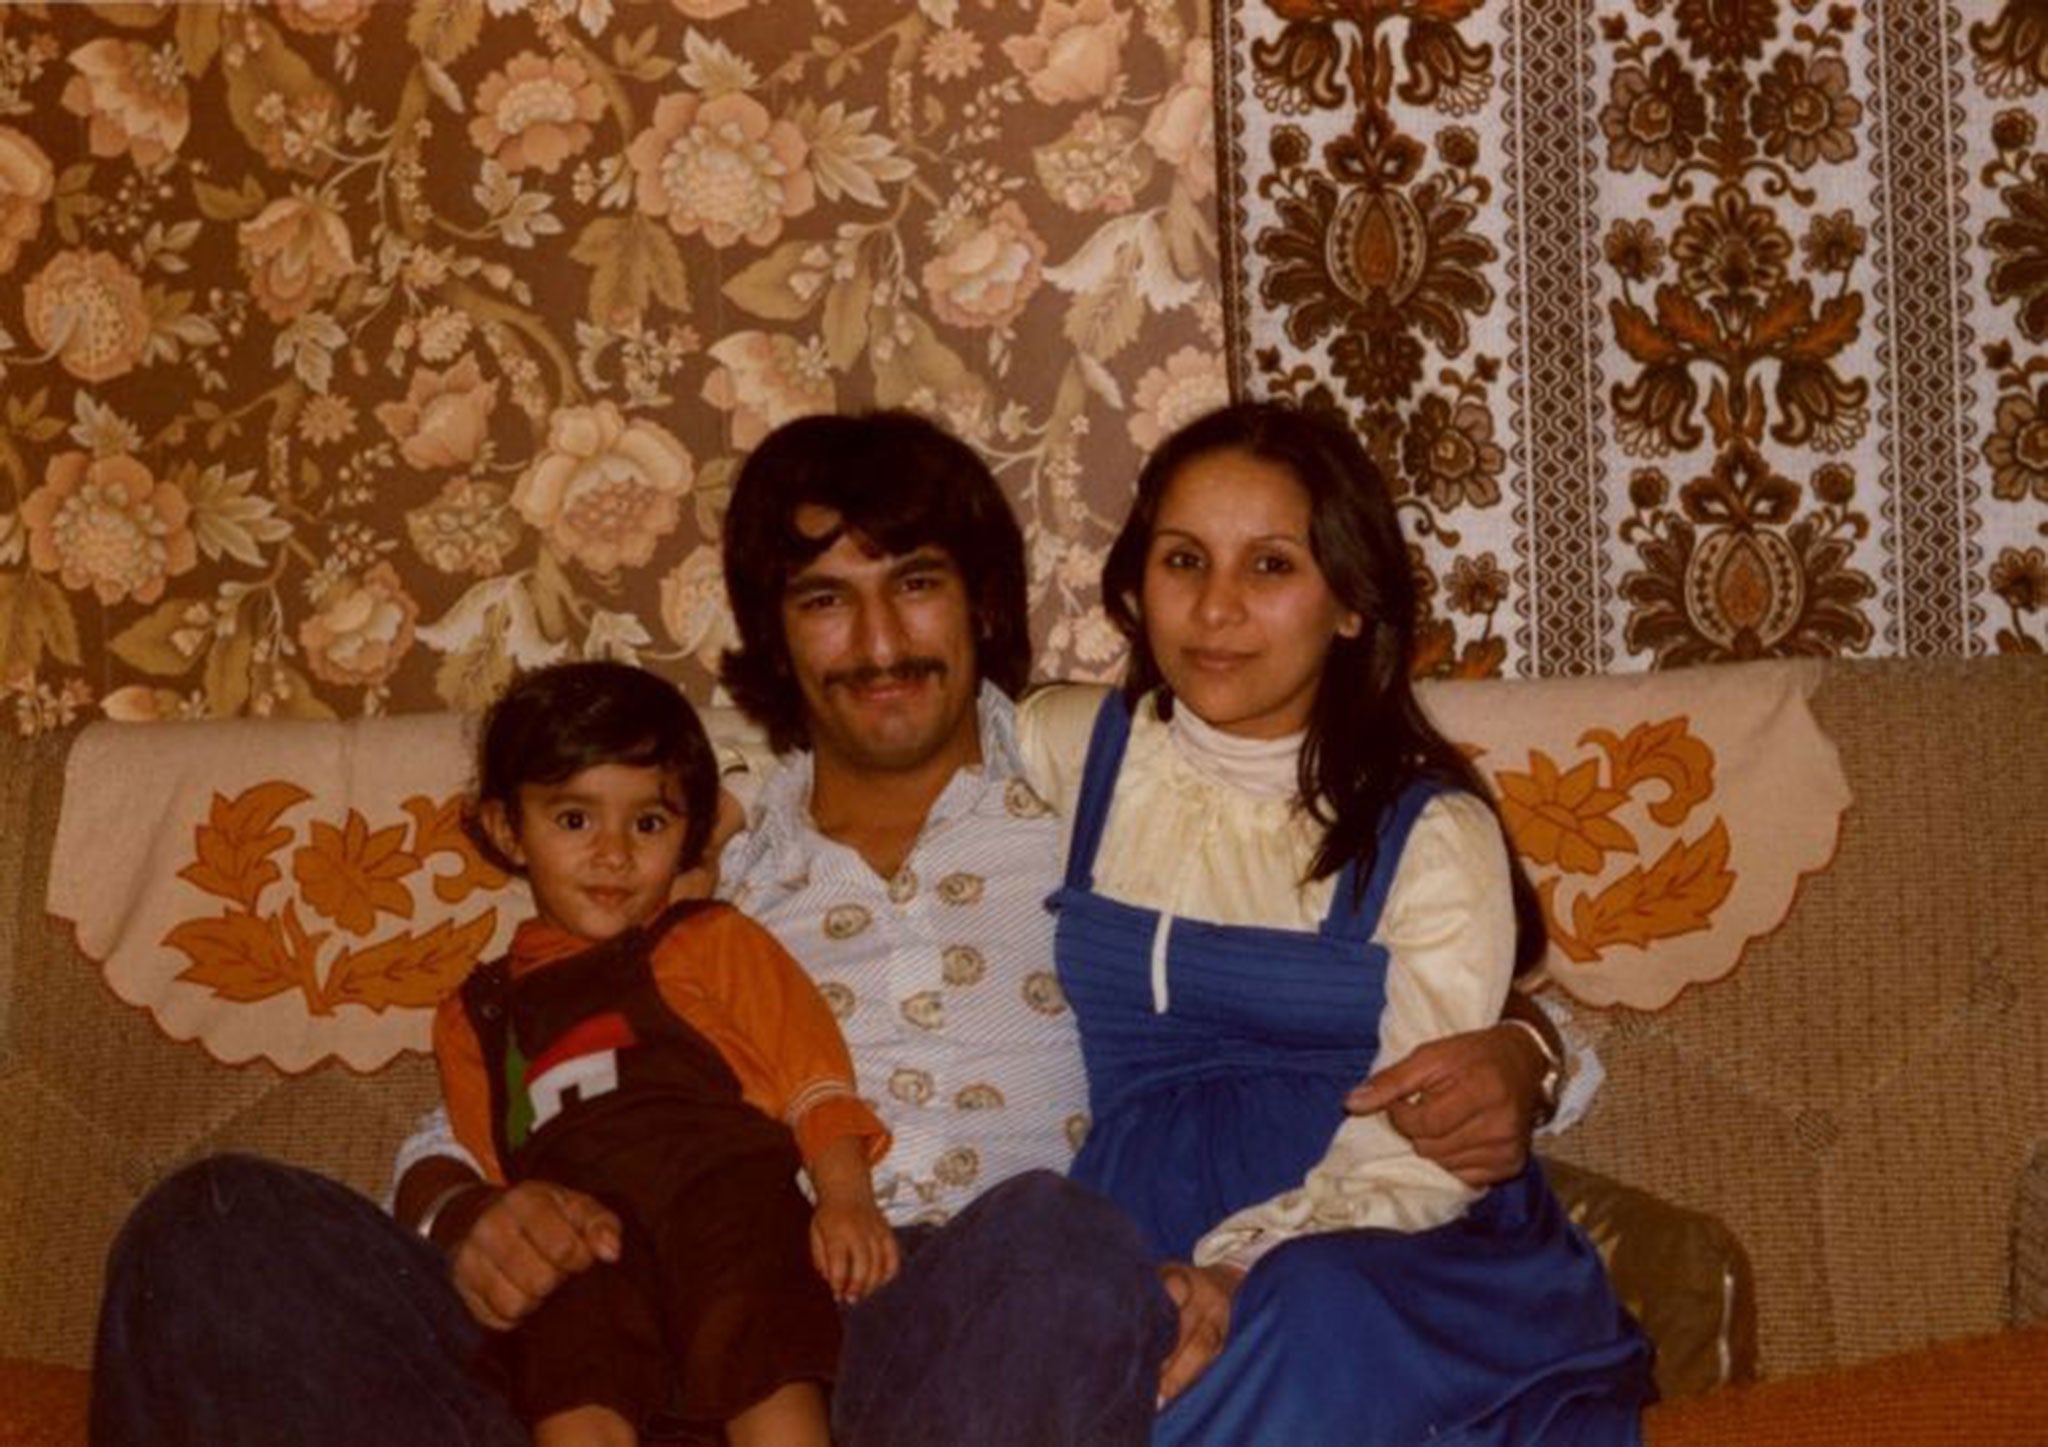 Anita Rani, left, as a child with her parents